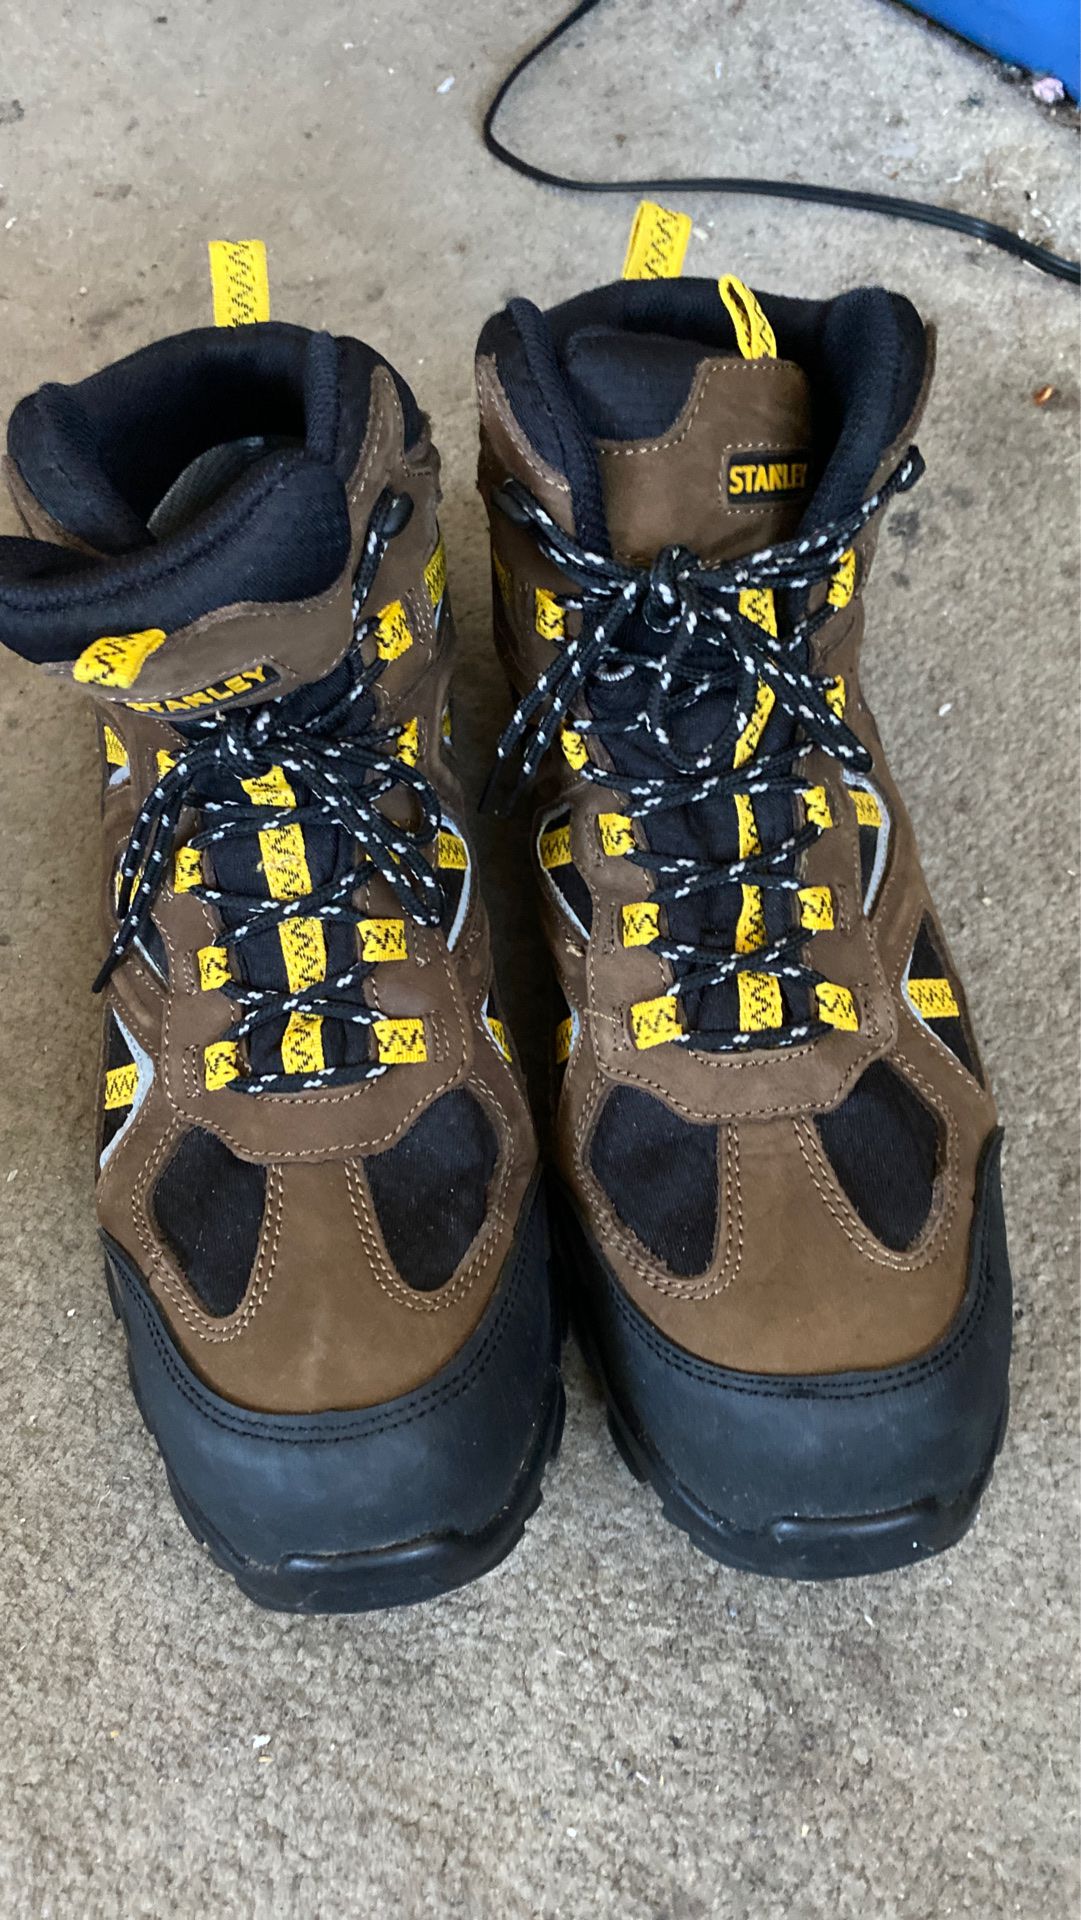 Stanley work boots/ hiking boots